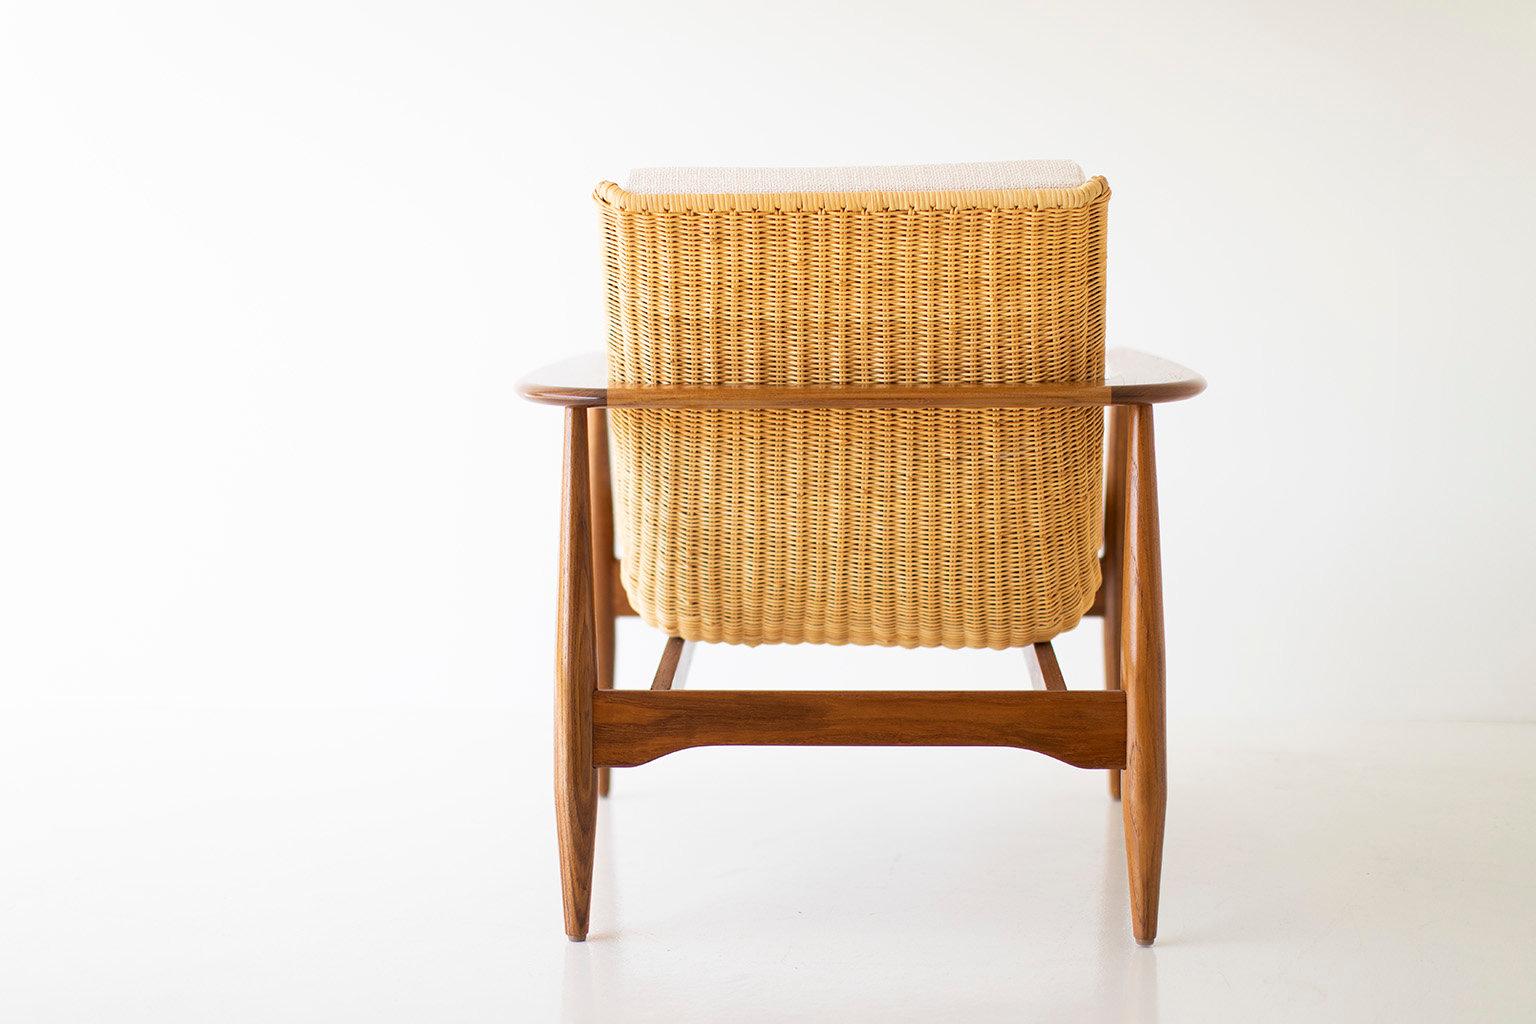 Contemporary Lawrence Peabody Wicker Lounge Chair for Craft Associates Furniture